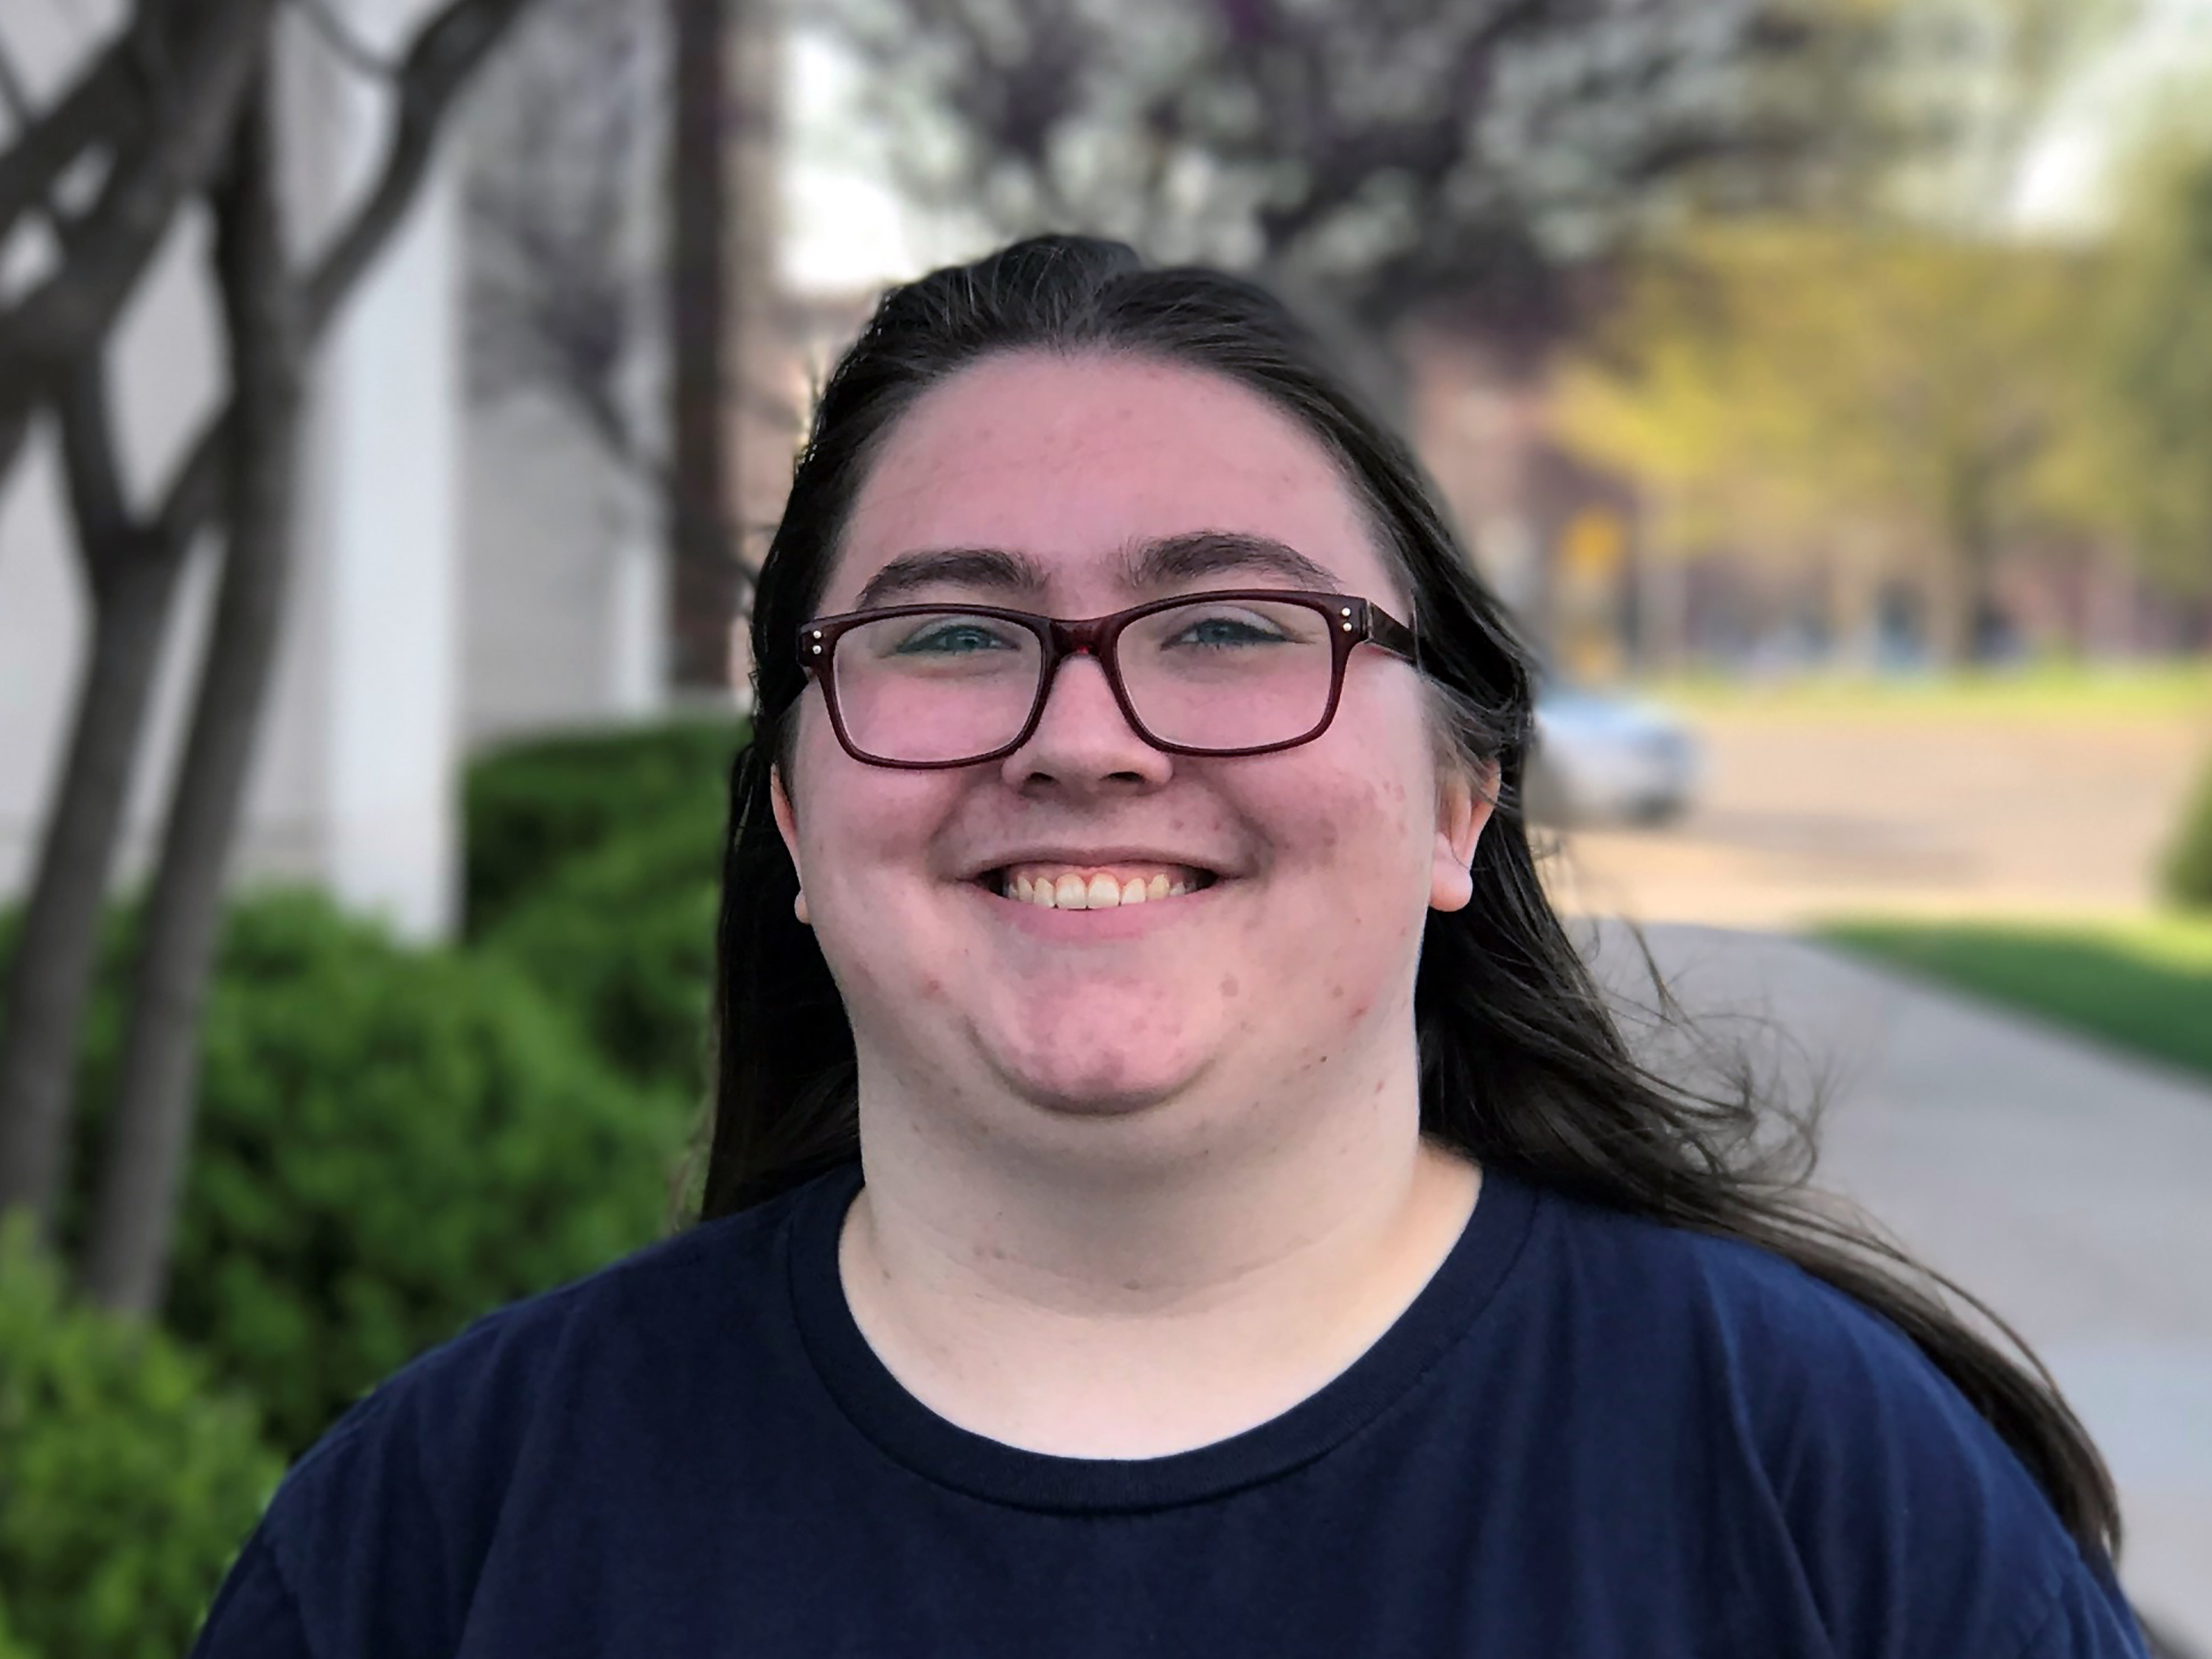 Brittany Wojciechowski, a Wichita State University PhD student in aerospace engineering, has been awarded the prestigious National Science Foundation’s (NSF) Graduate Research Fellowship (GRF), which is worth more than $120,000.